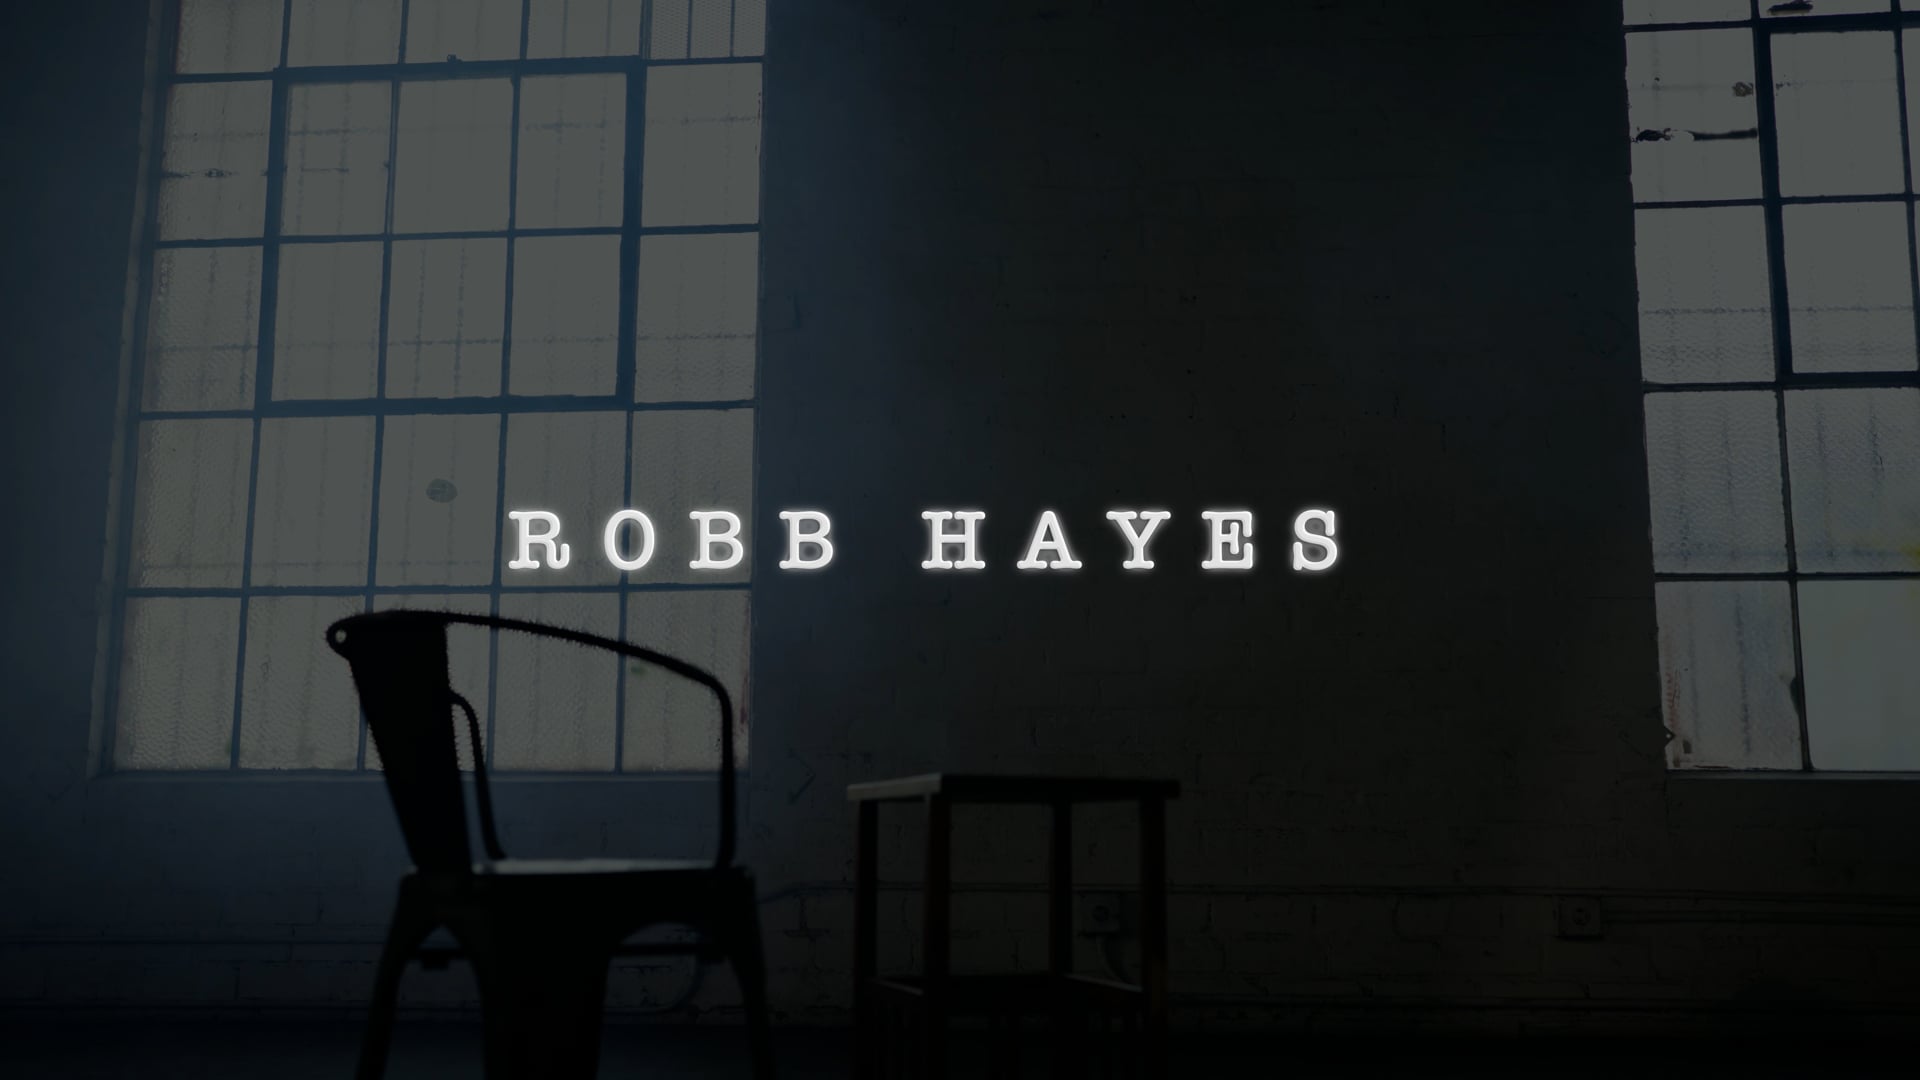 Music video - ROBB HAYES "Gold Letter"